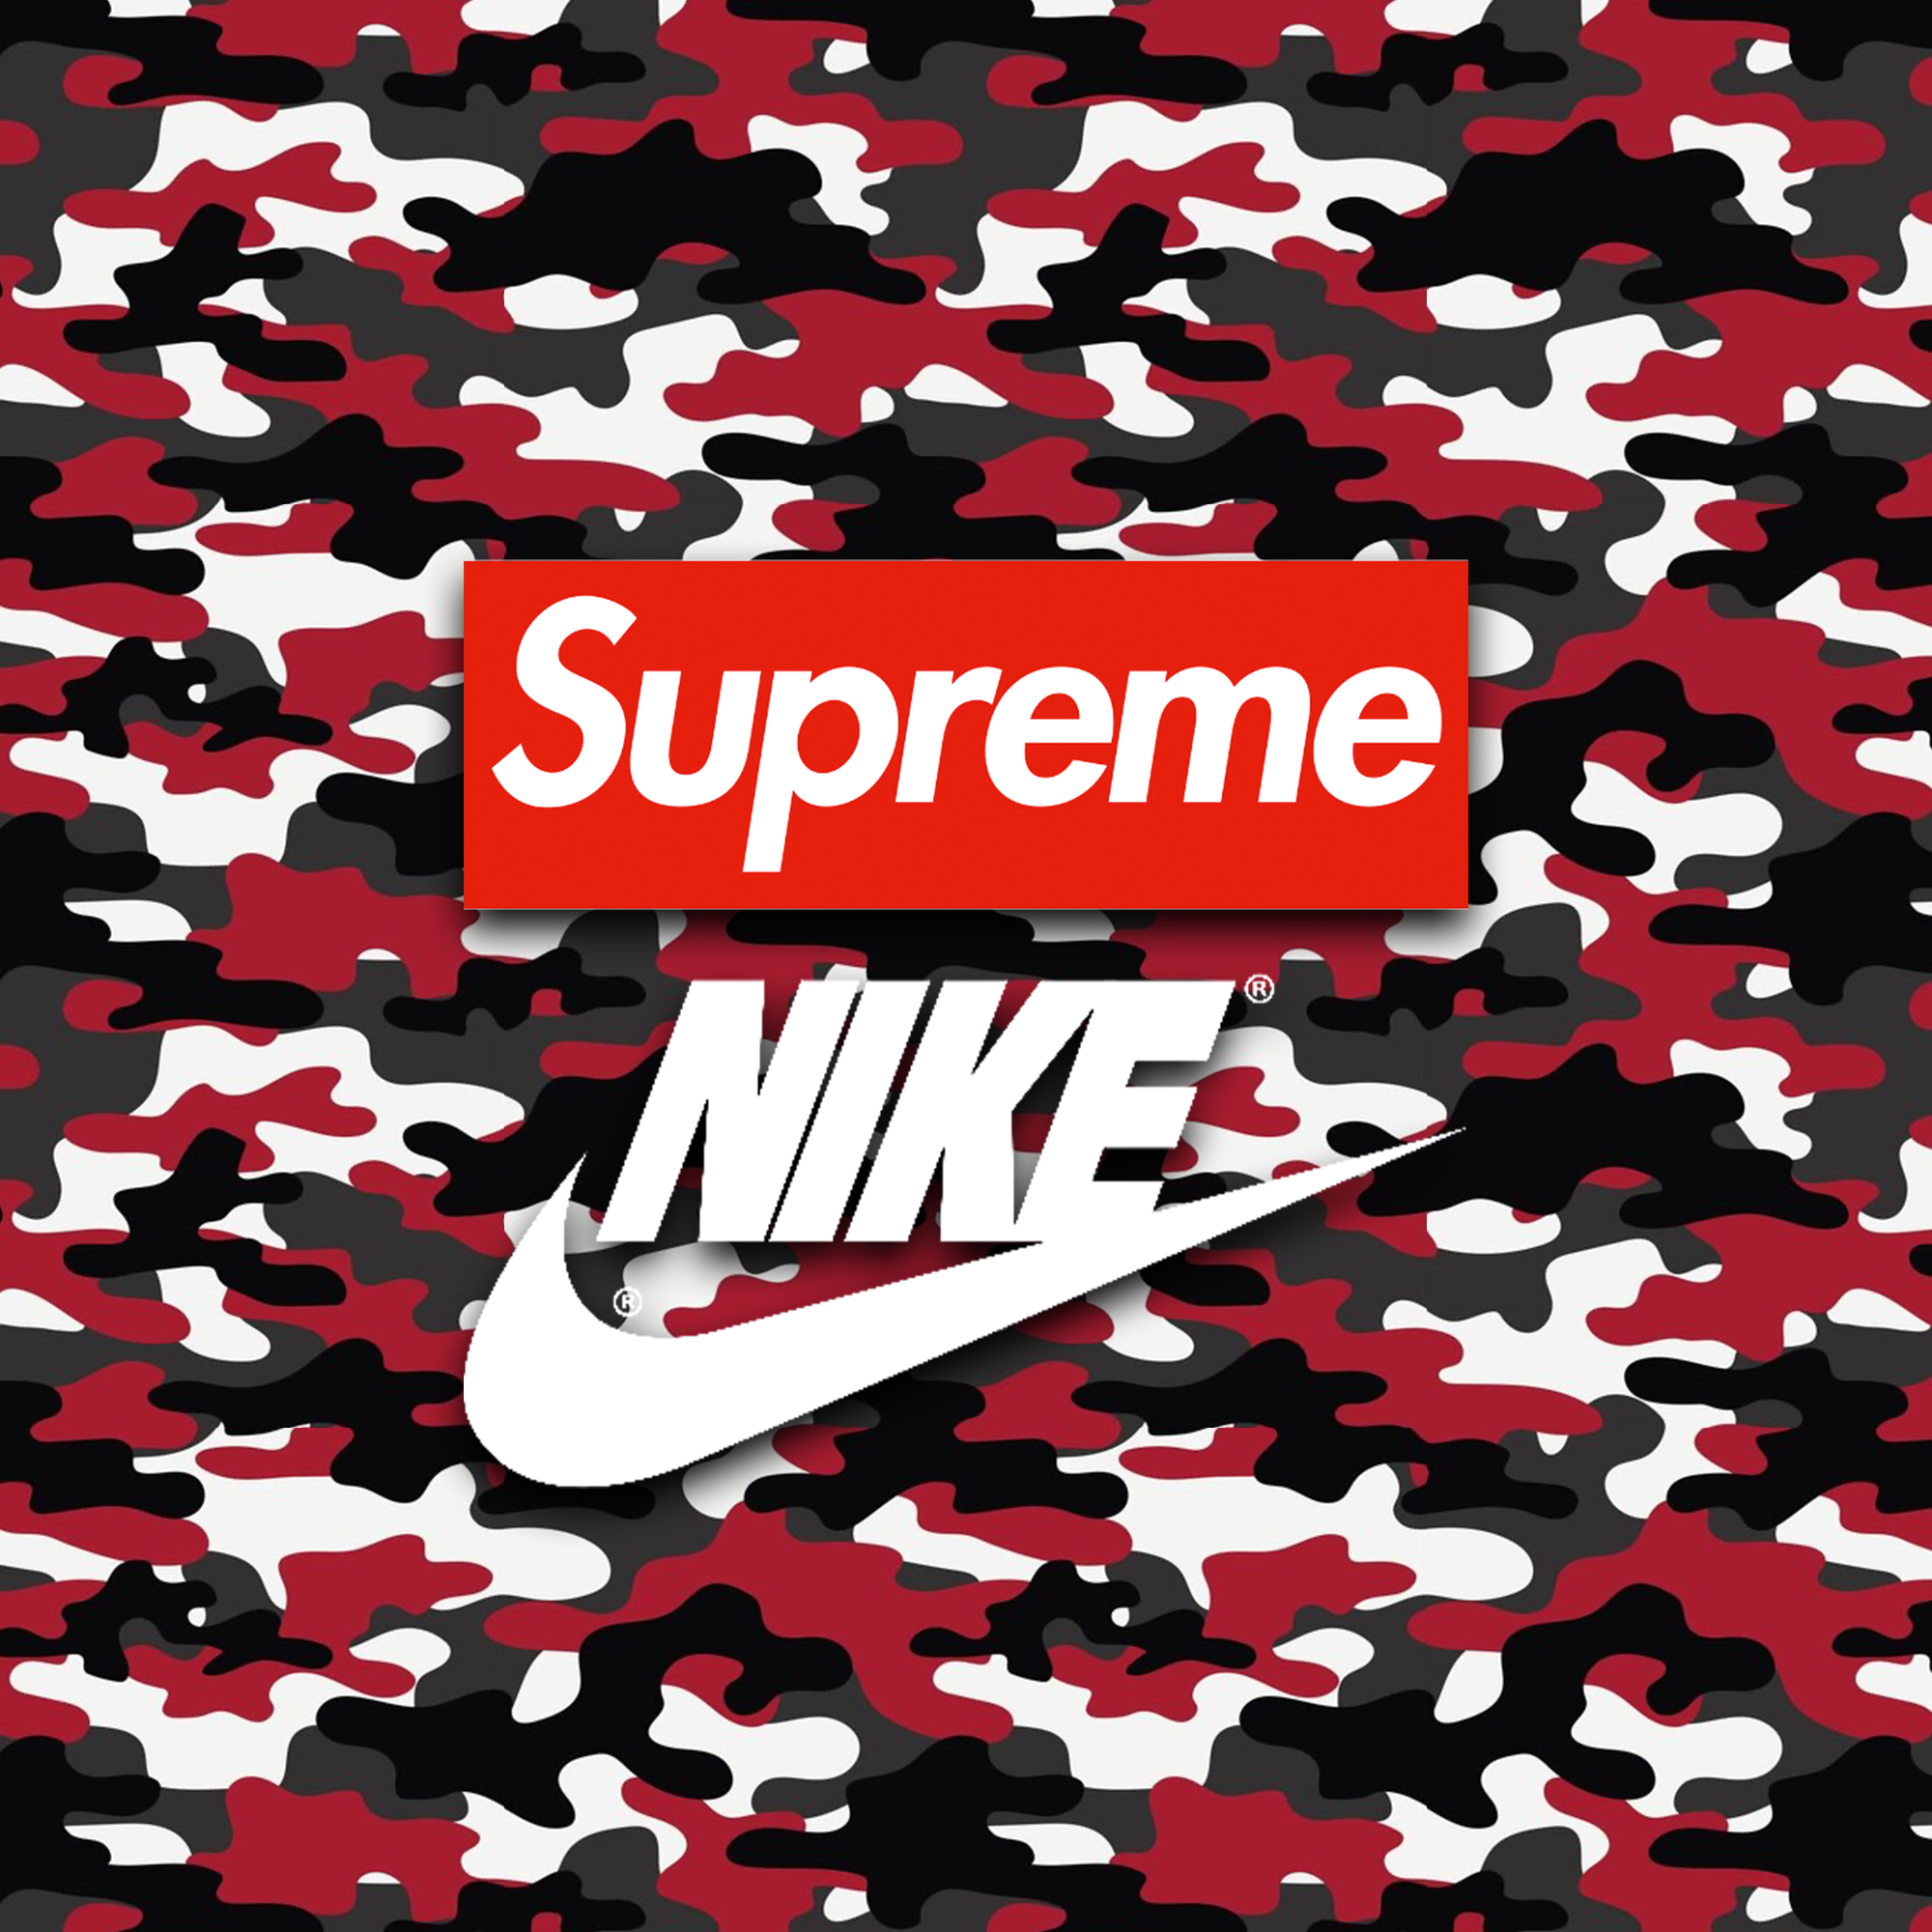 Supreme Drops on X: Supreme x Nike apparel collection is set to release  this week 🔥 What do you expect from this? Stay tuned for further details!   / X